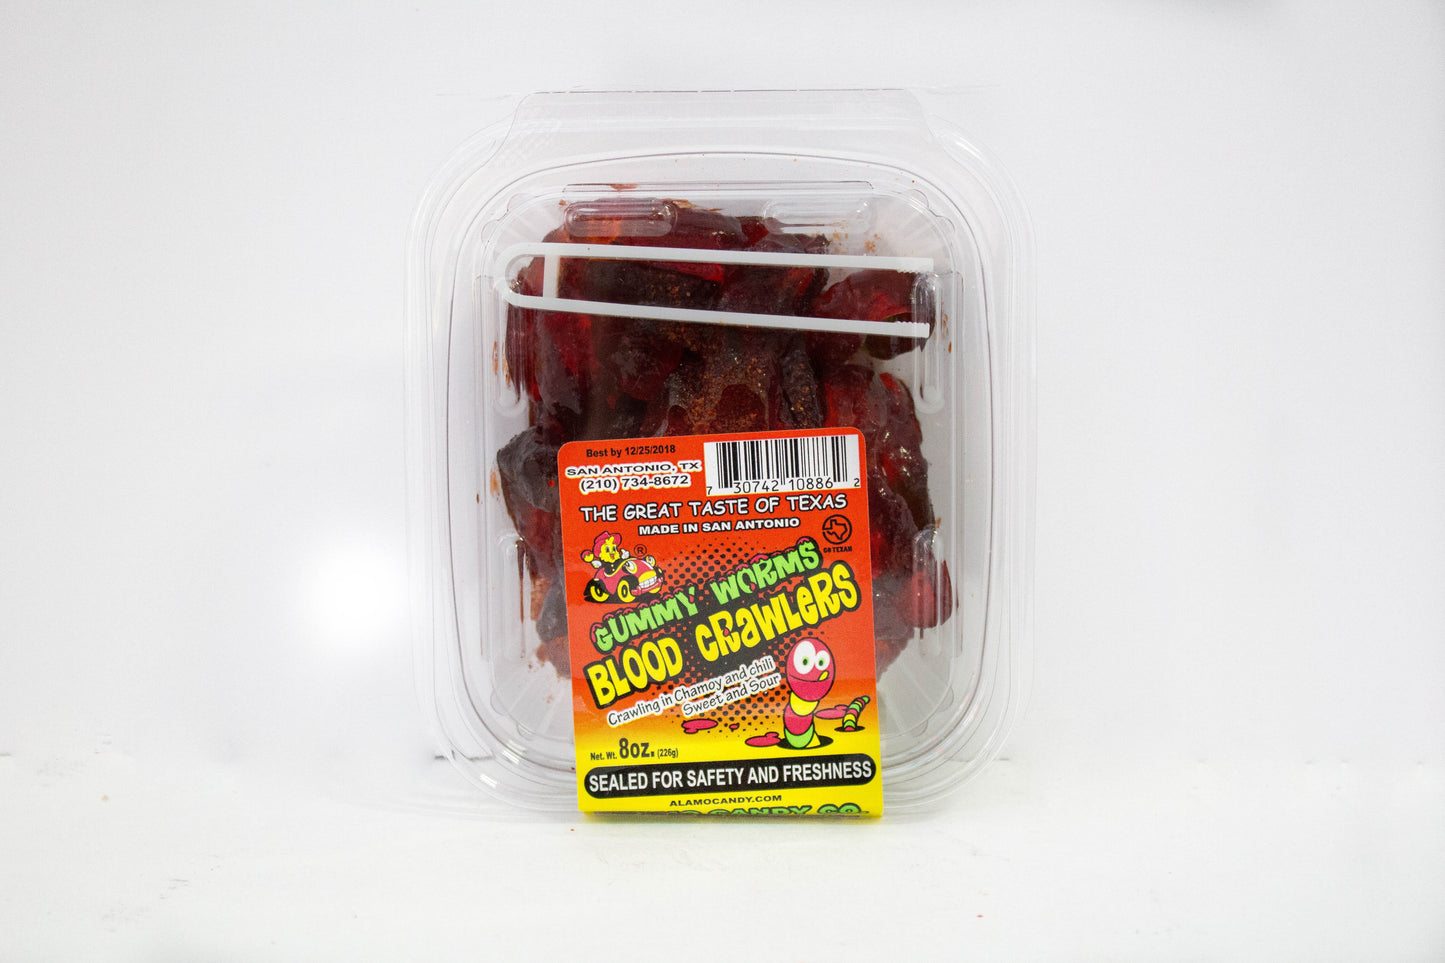 Gummy Worms "Blood- Tub-Alamo Candy Count 24